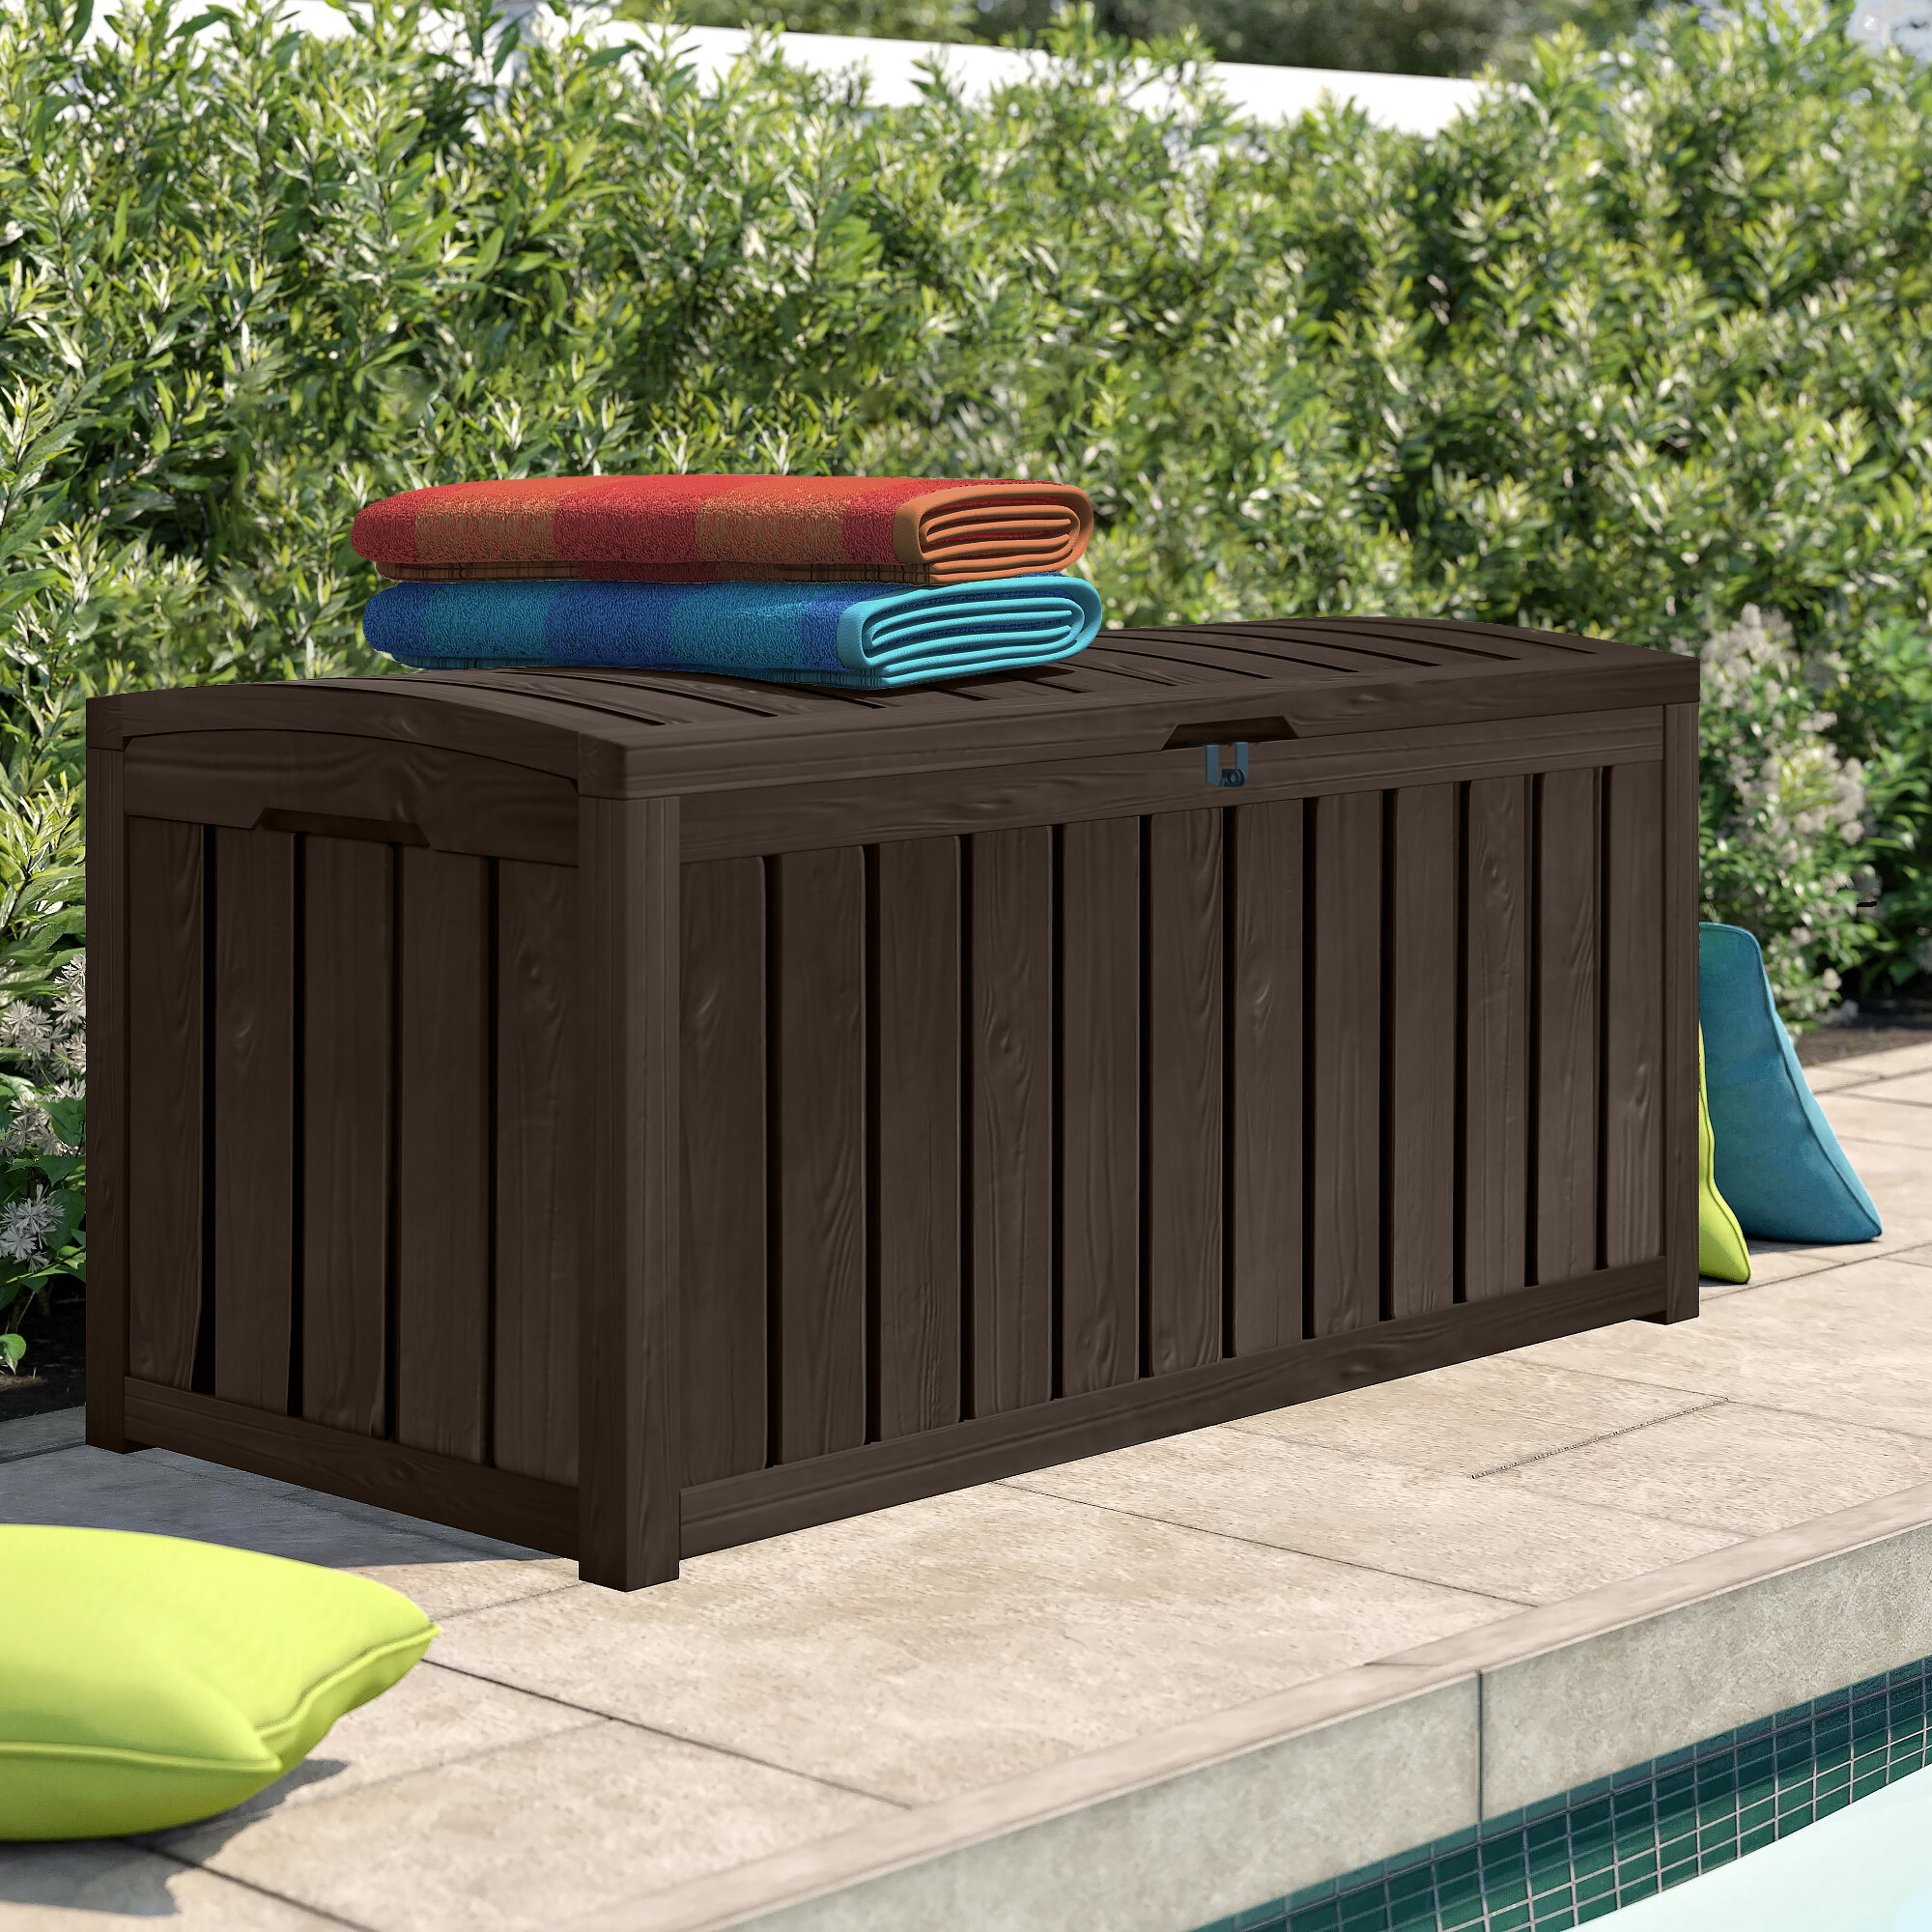 Big Size Deck Box Patio Storage Box Black Rattan Waterproof Outdoor Storage Container Bin with Wheels and Handrails for Yard Patio Swimming Pool 120 Gallon Outdoor Storage Box 